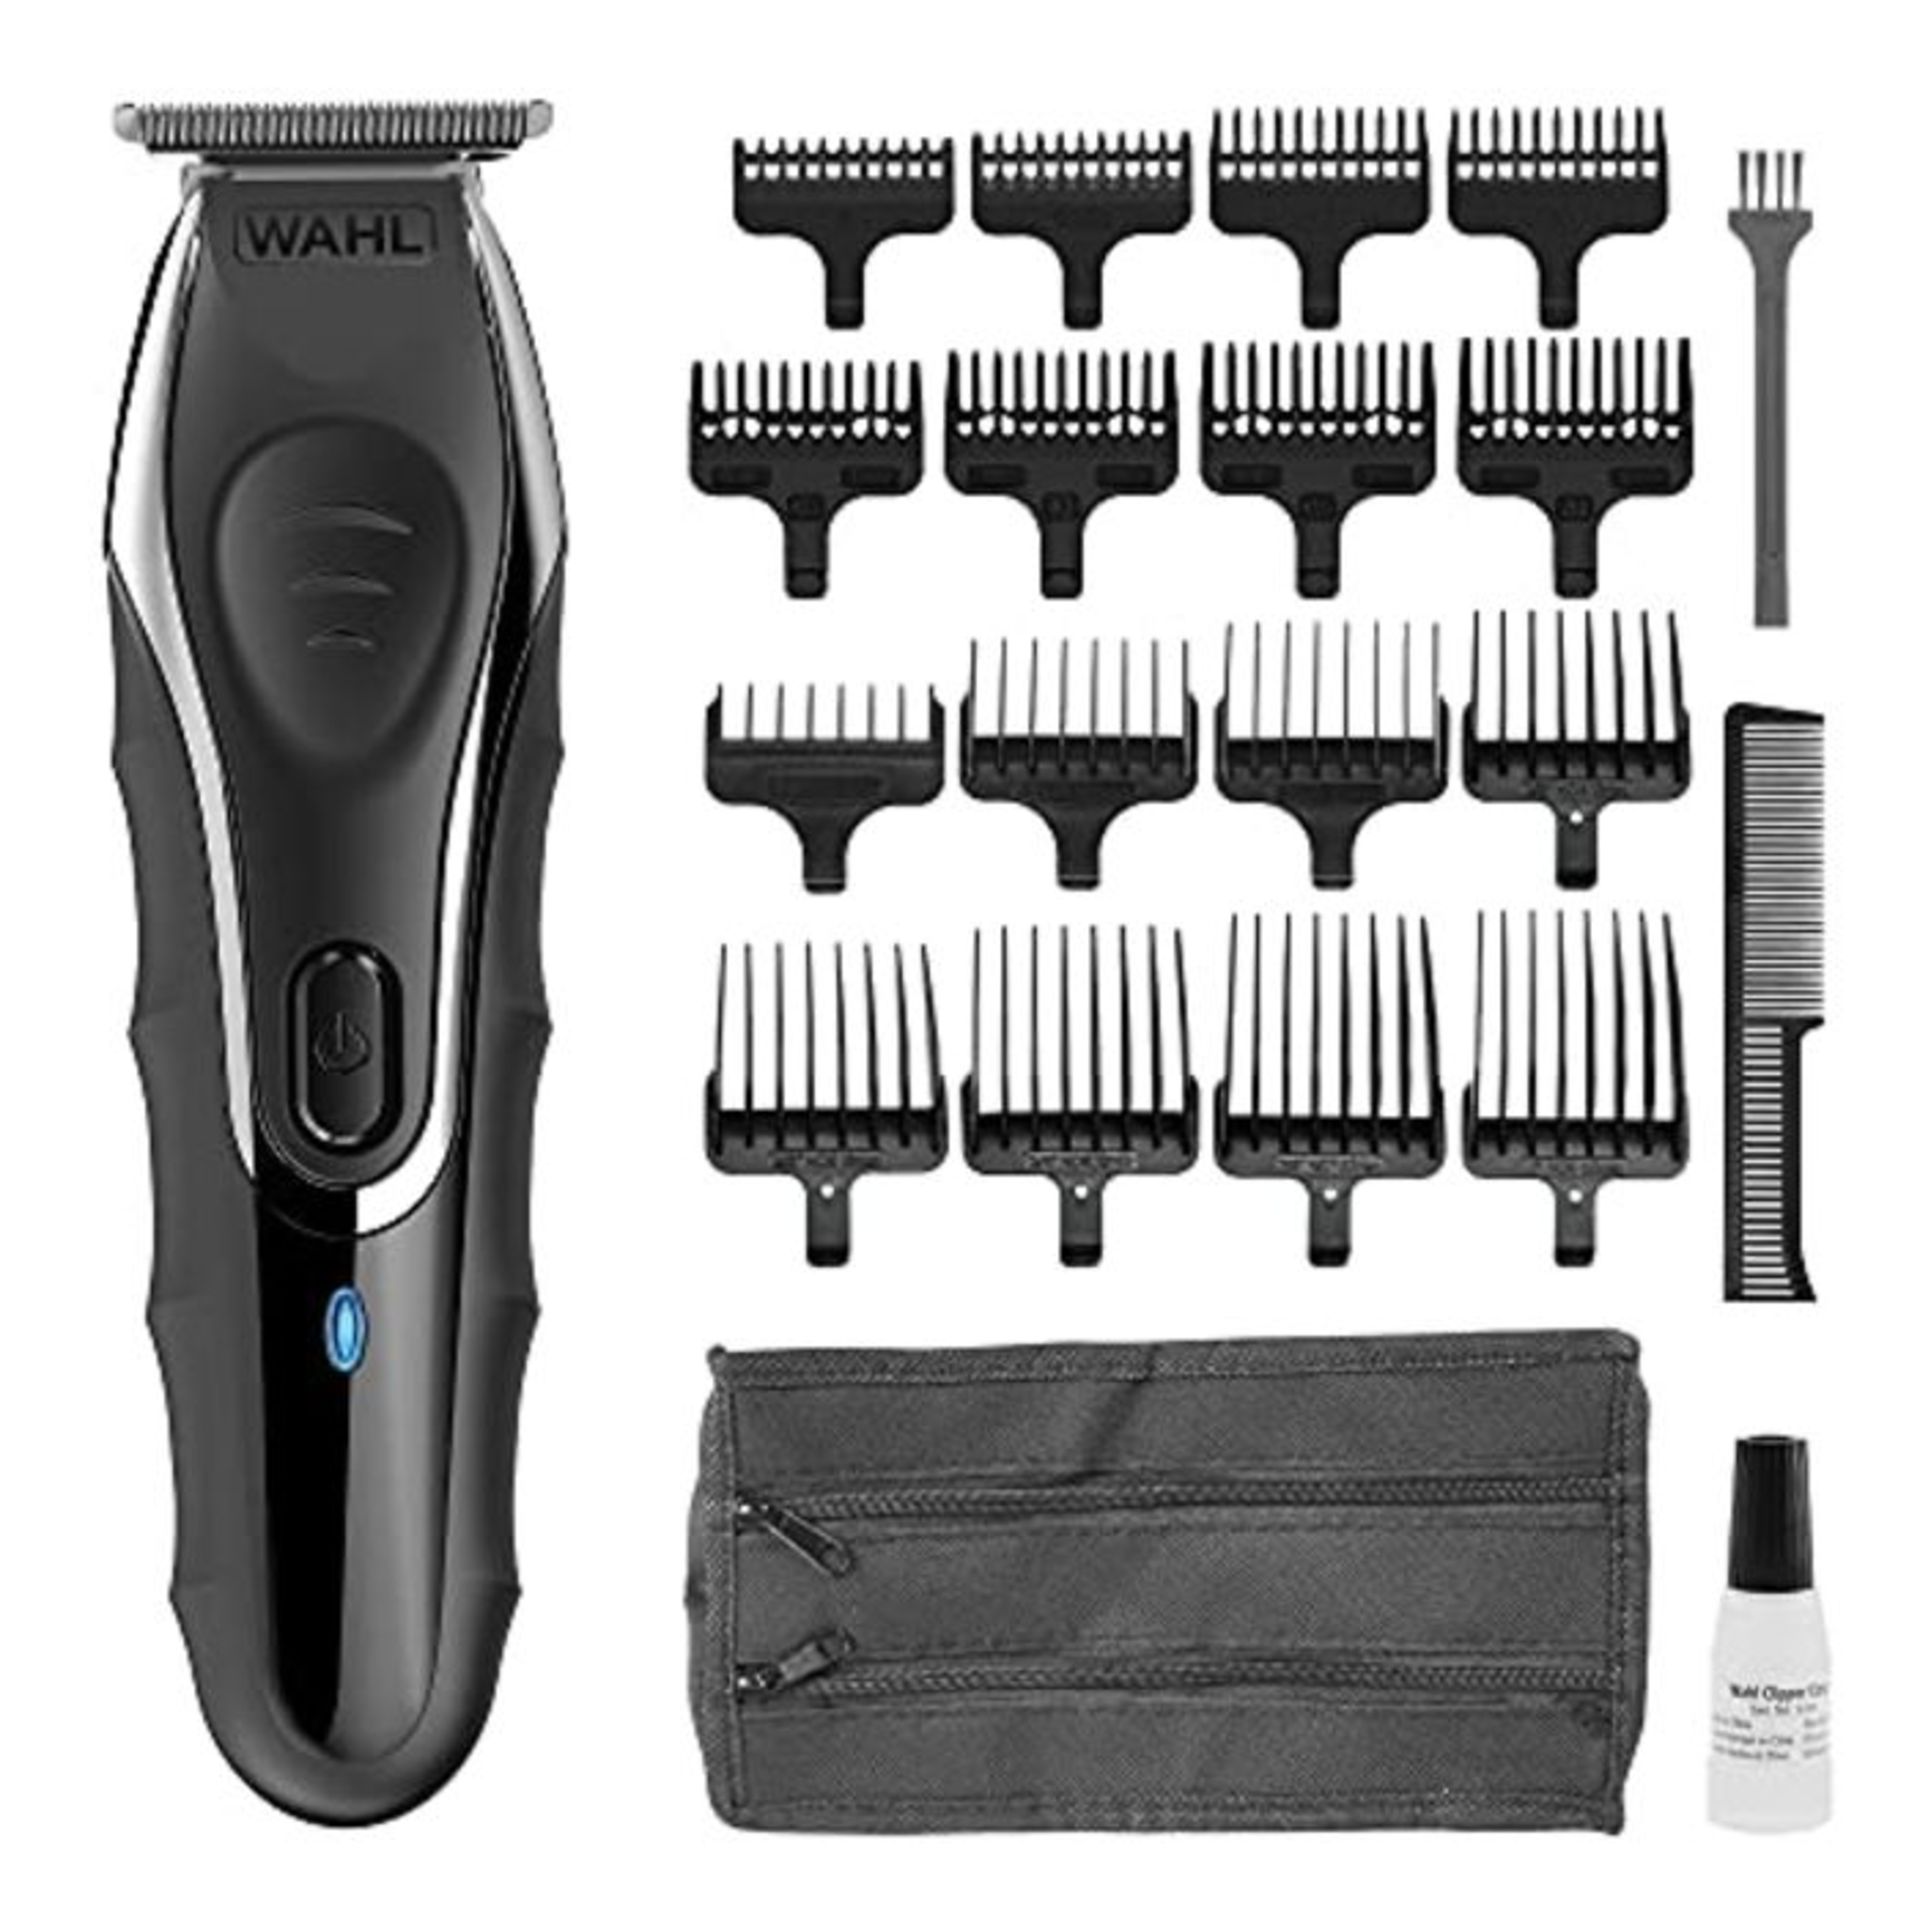 RRP £74.00 WAHL Beard Trimmer Men, Aqua Blade Hair Trimmers for Men, Stubble Trimmer, Male Groomi